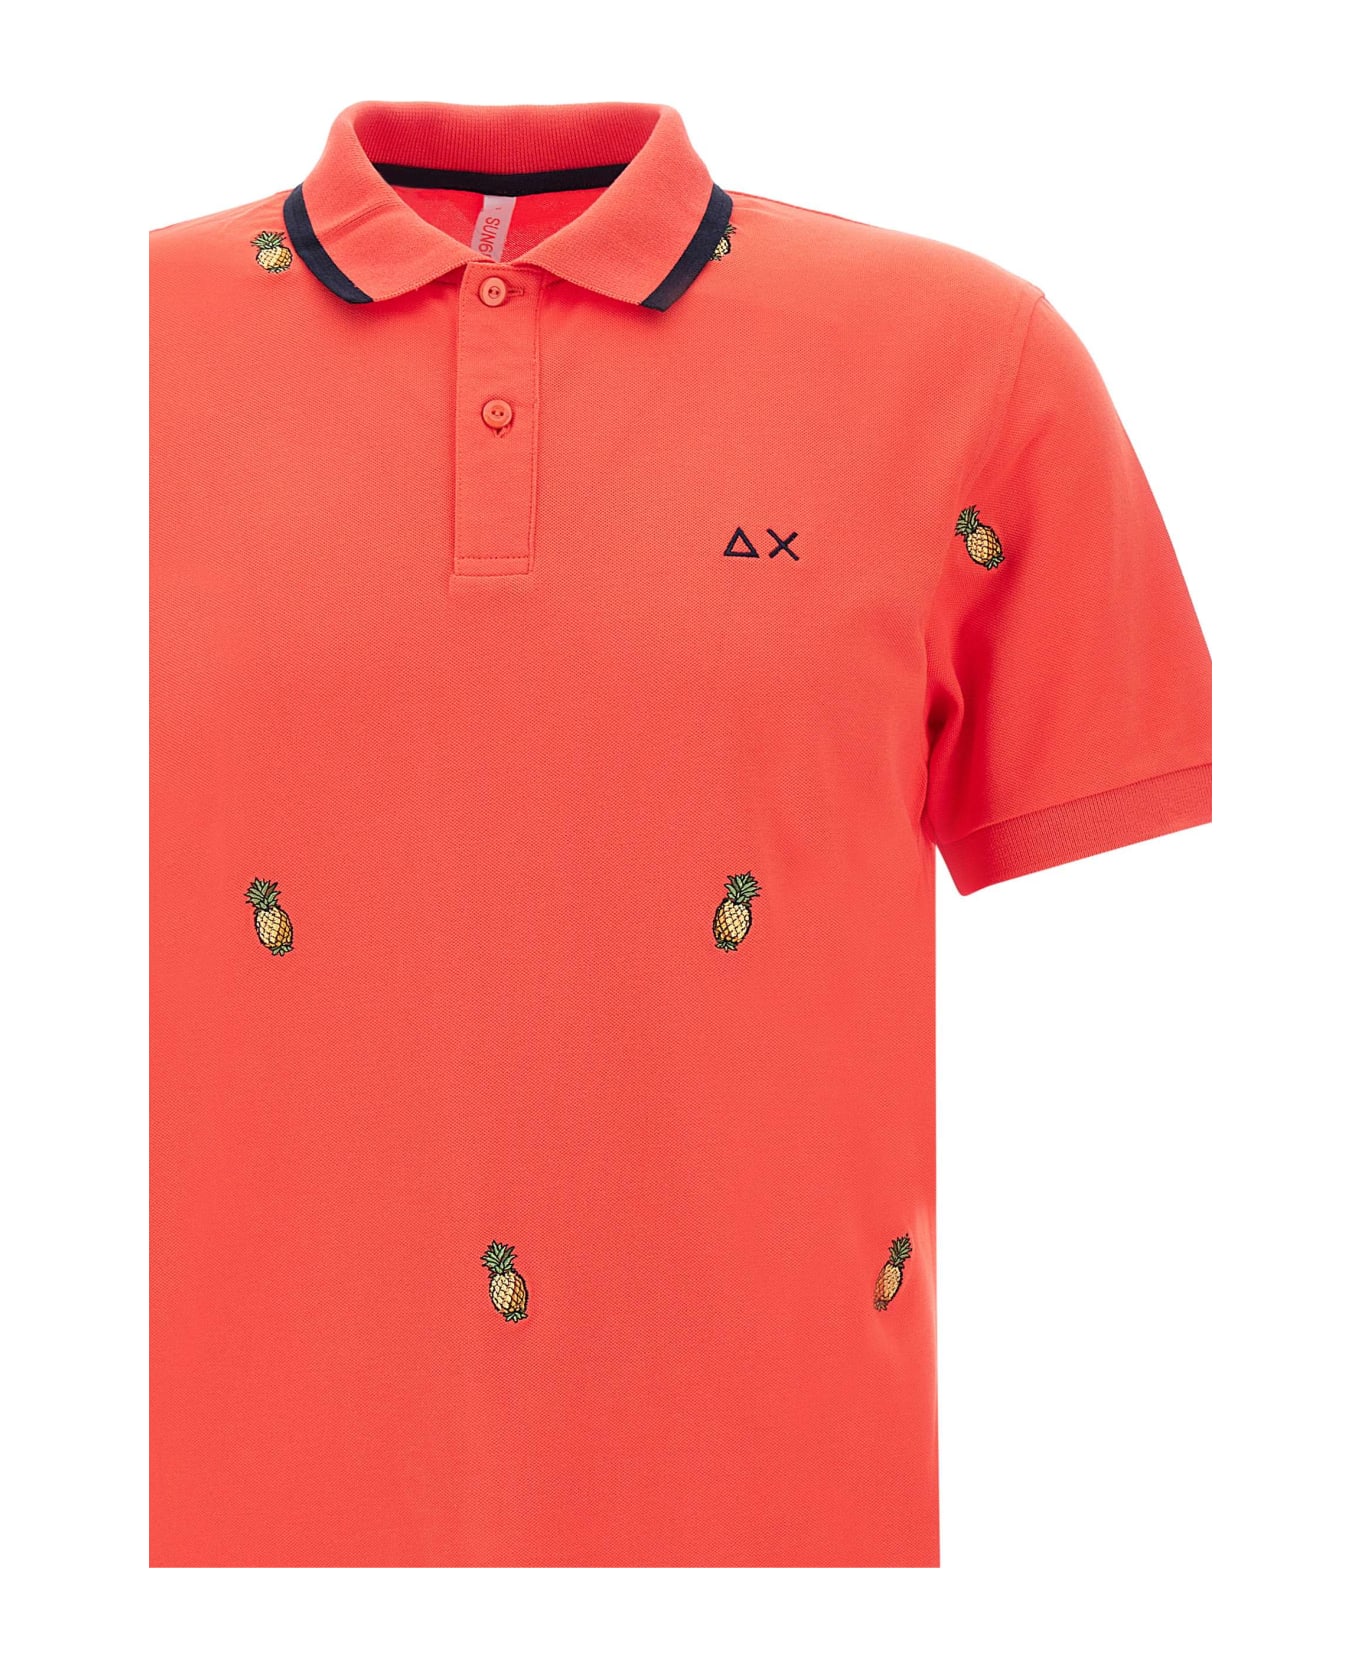 Sun 68 "full Embrodery" Cotton Polo Shirt - RED ポロシャツ